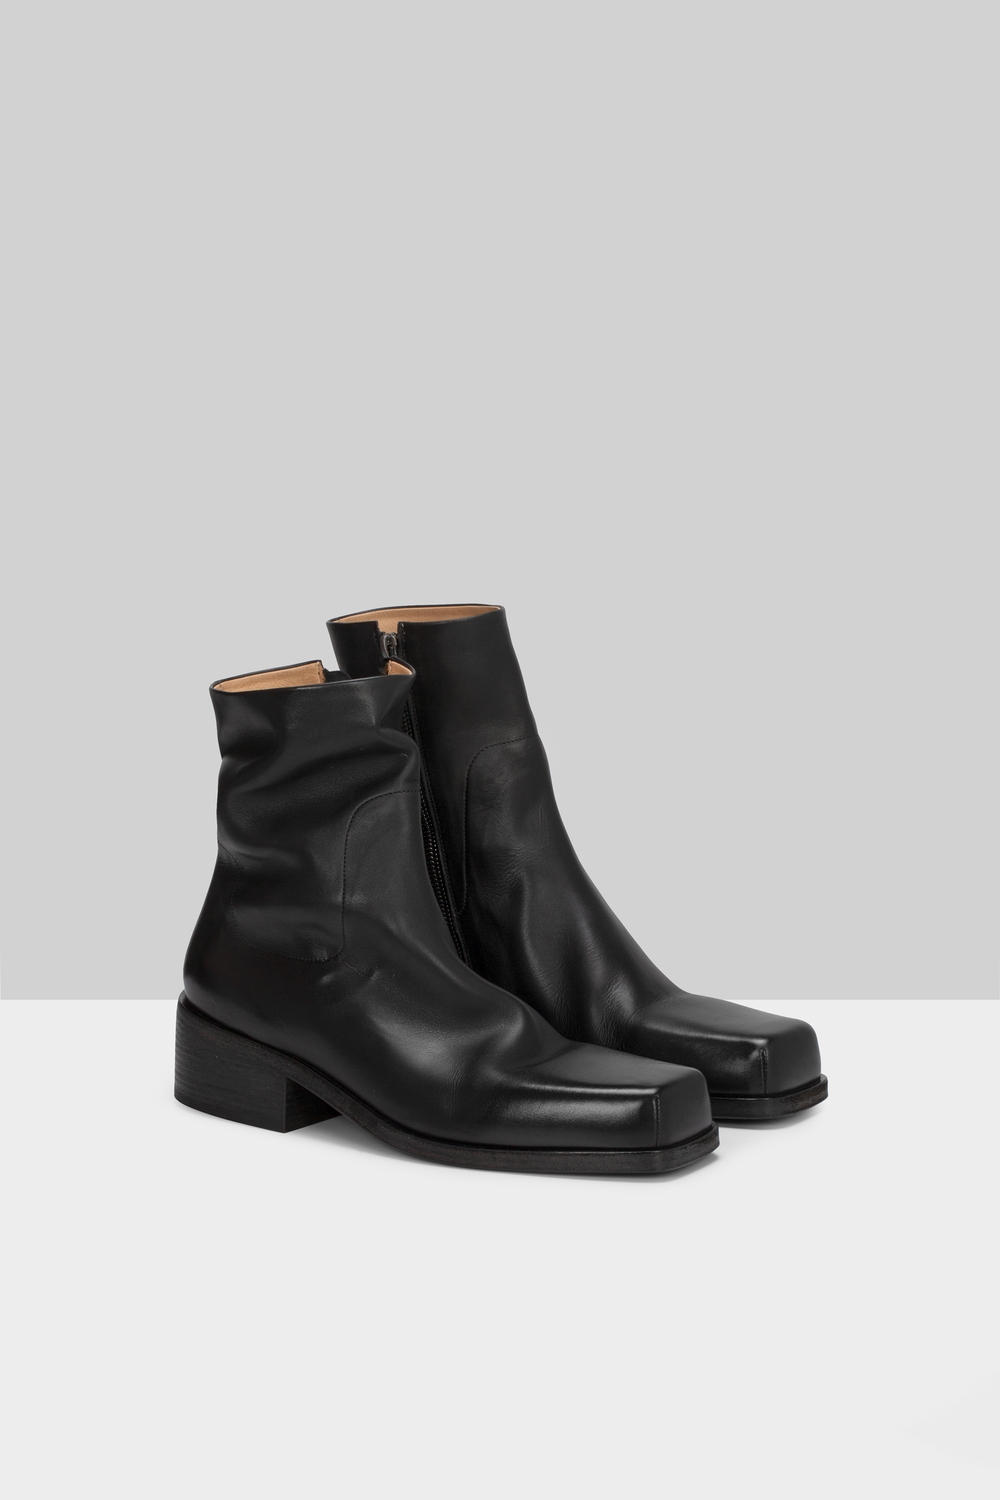 Cassello Ankle Boot Black hover